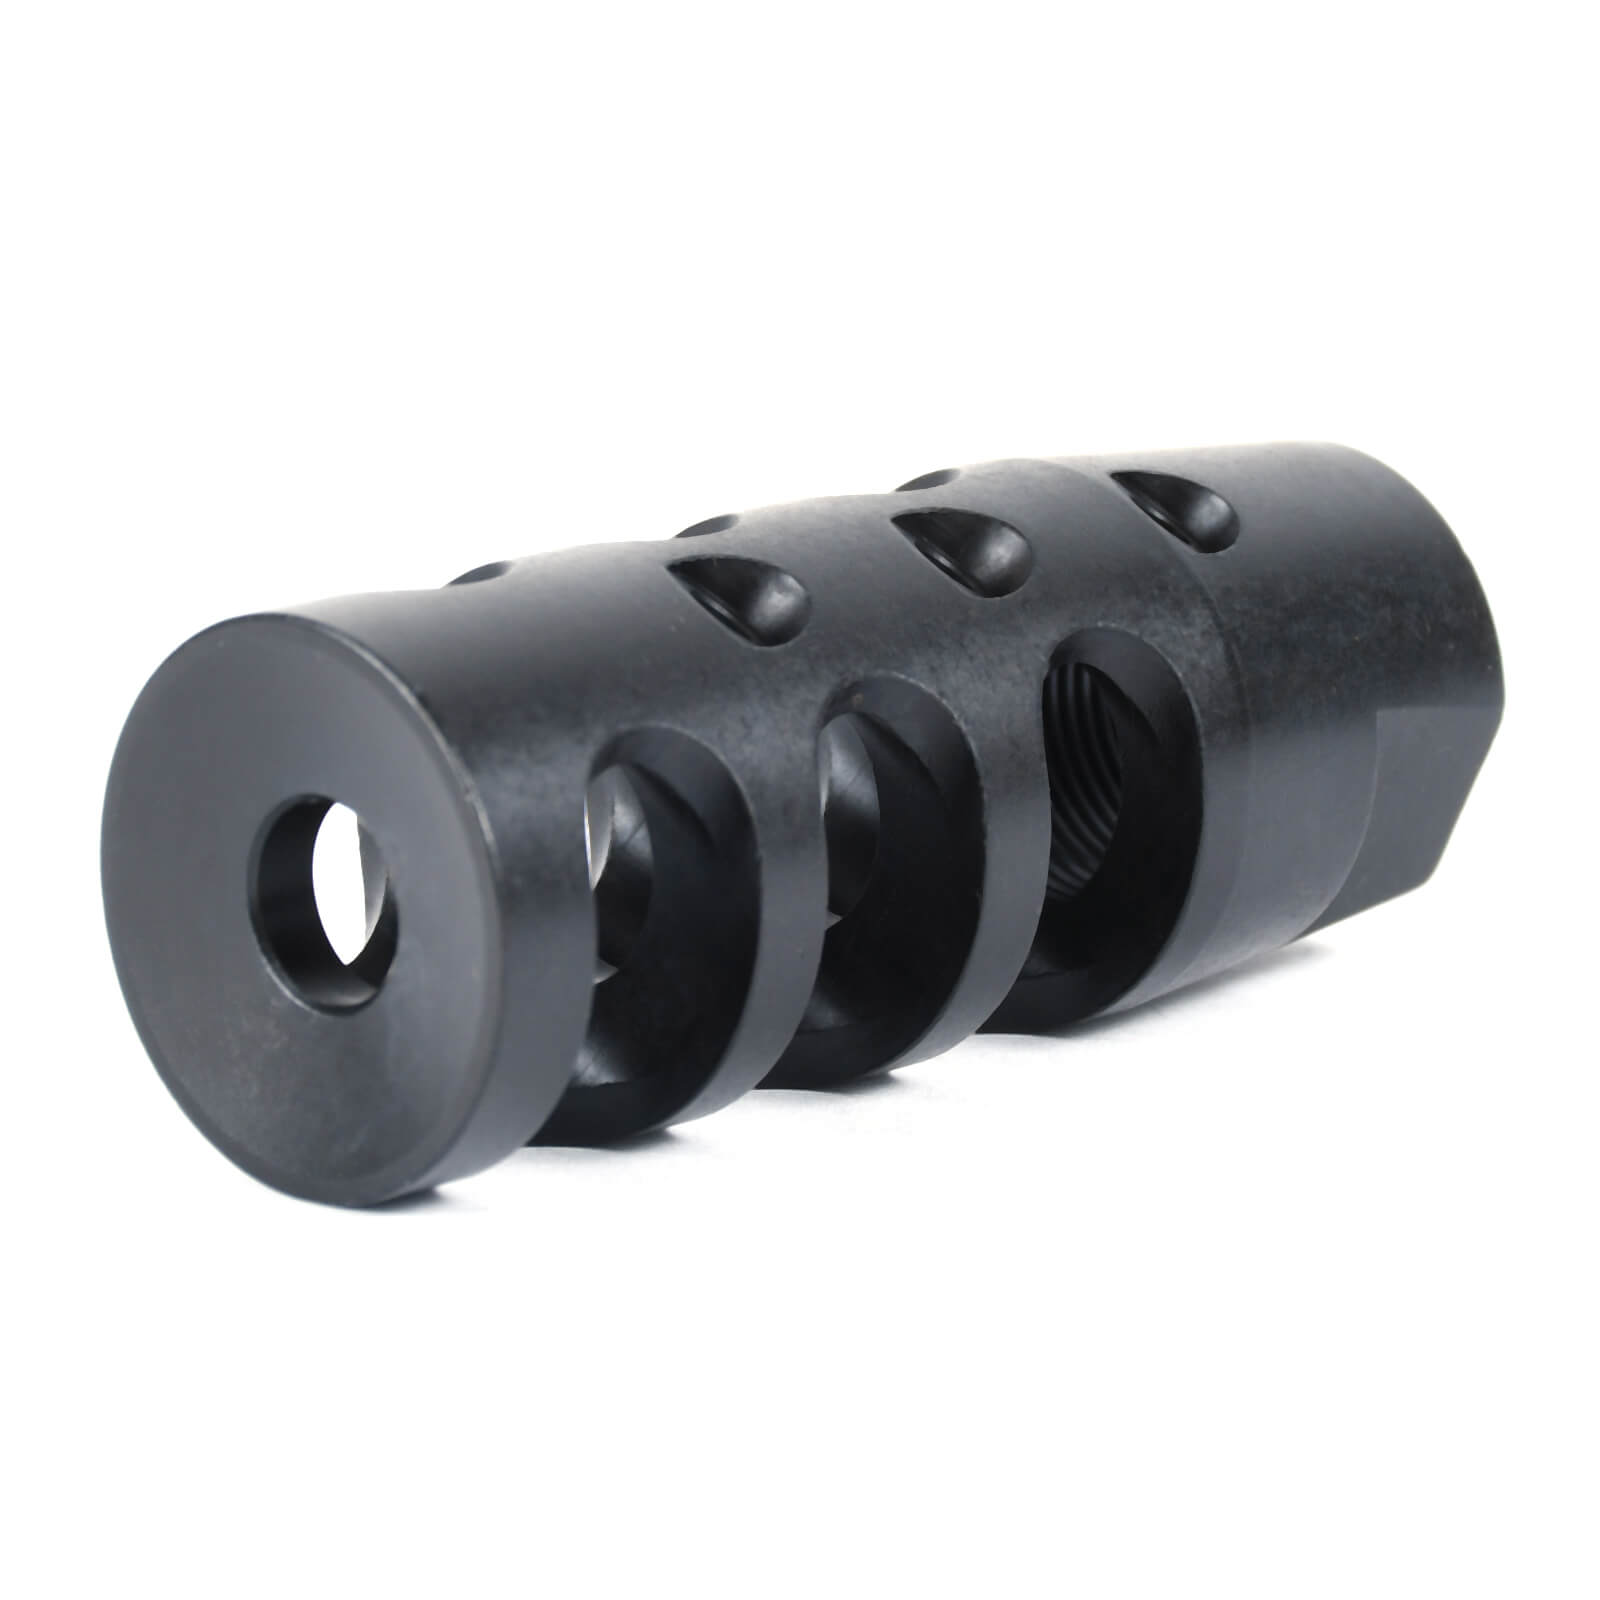 AT3™ AR-15 3-Port Muzzle Brake with Crush Washer - 1/2x28